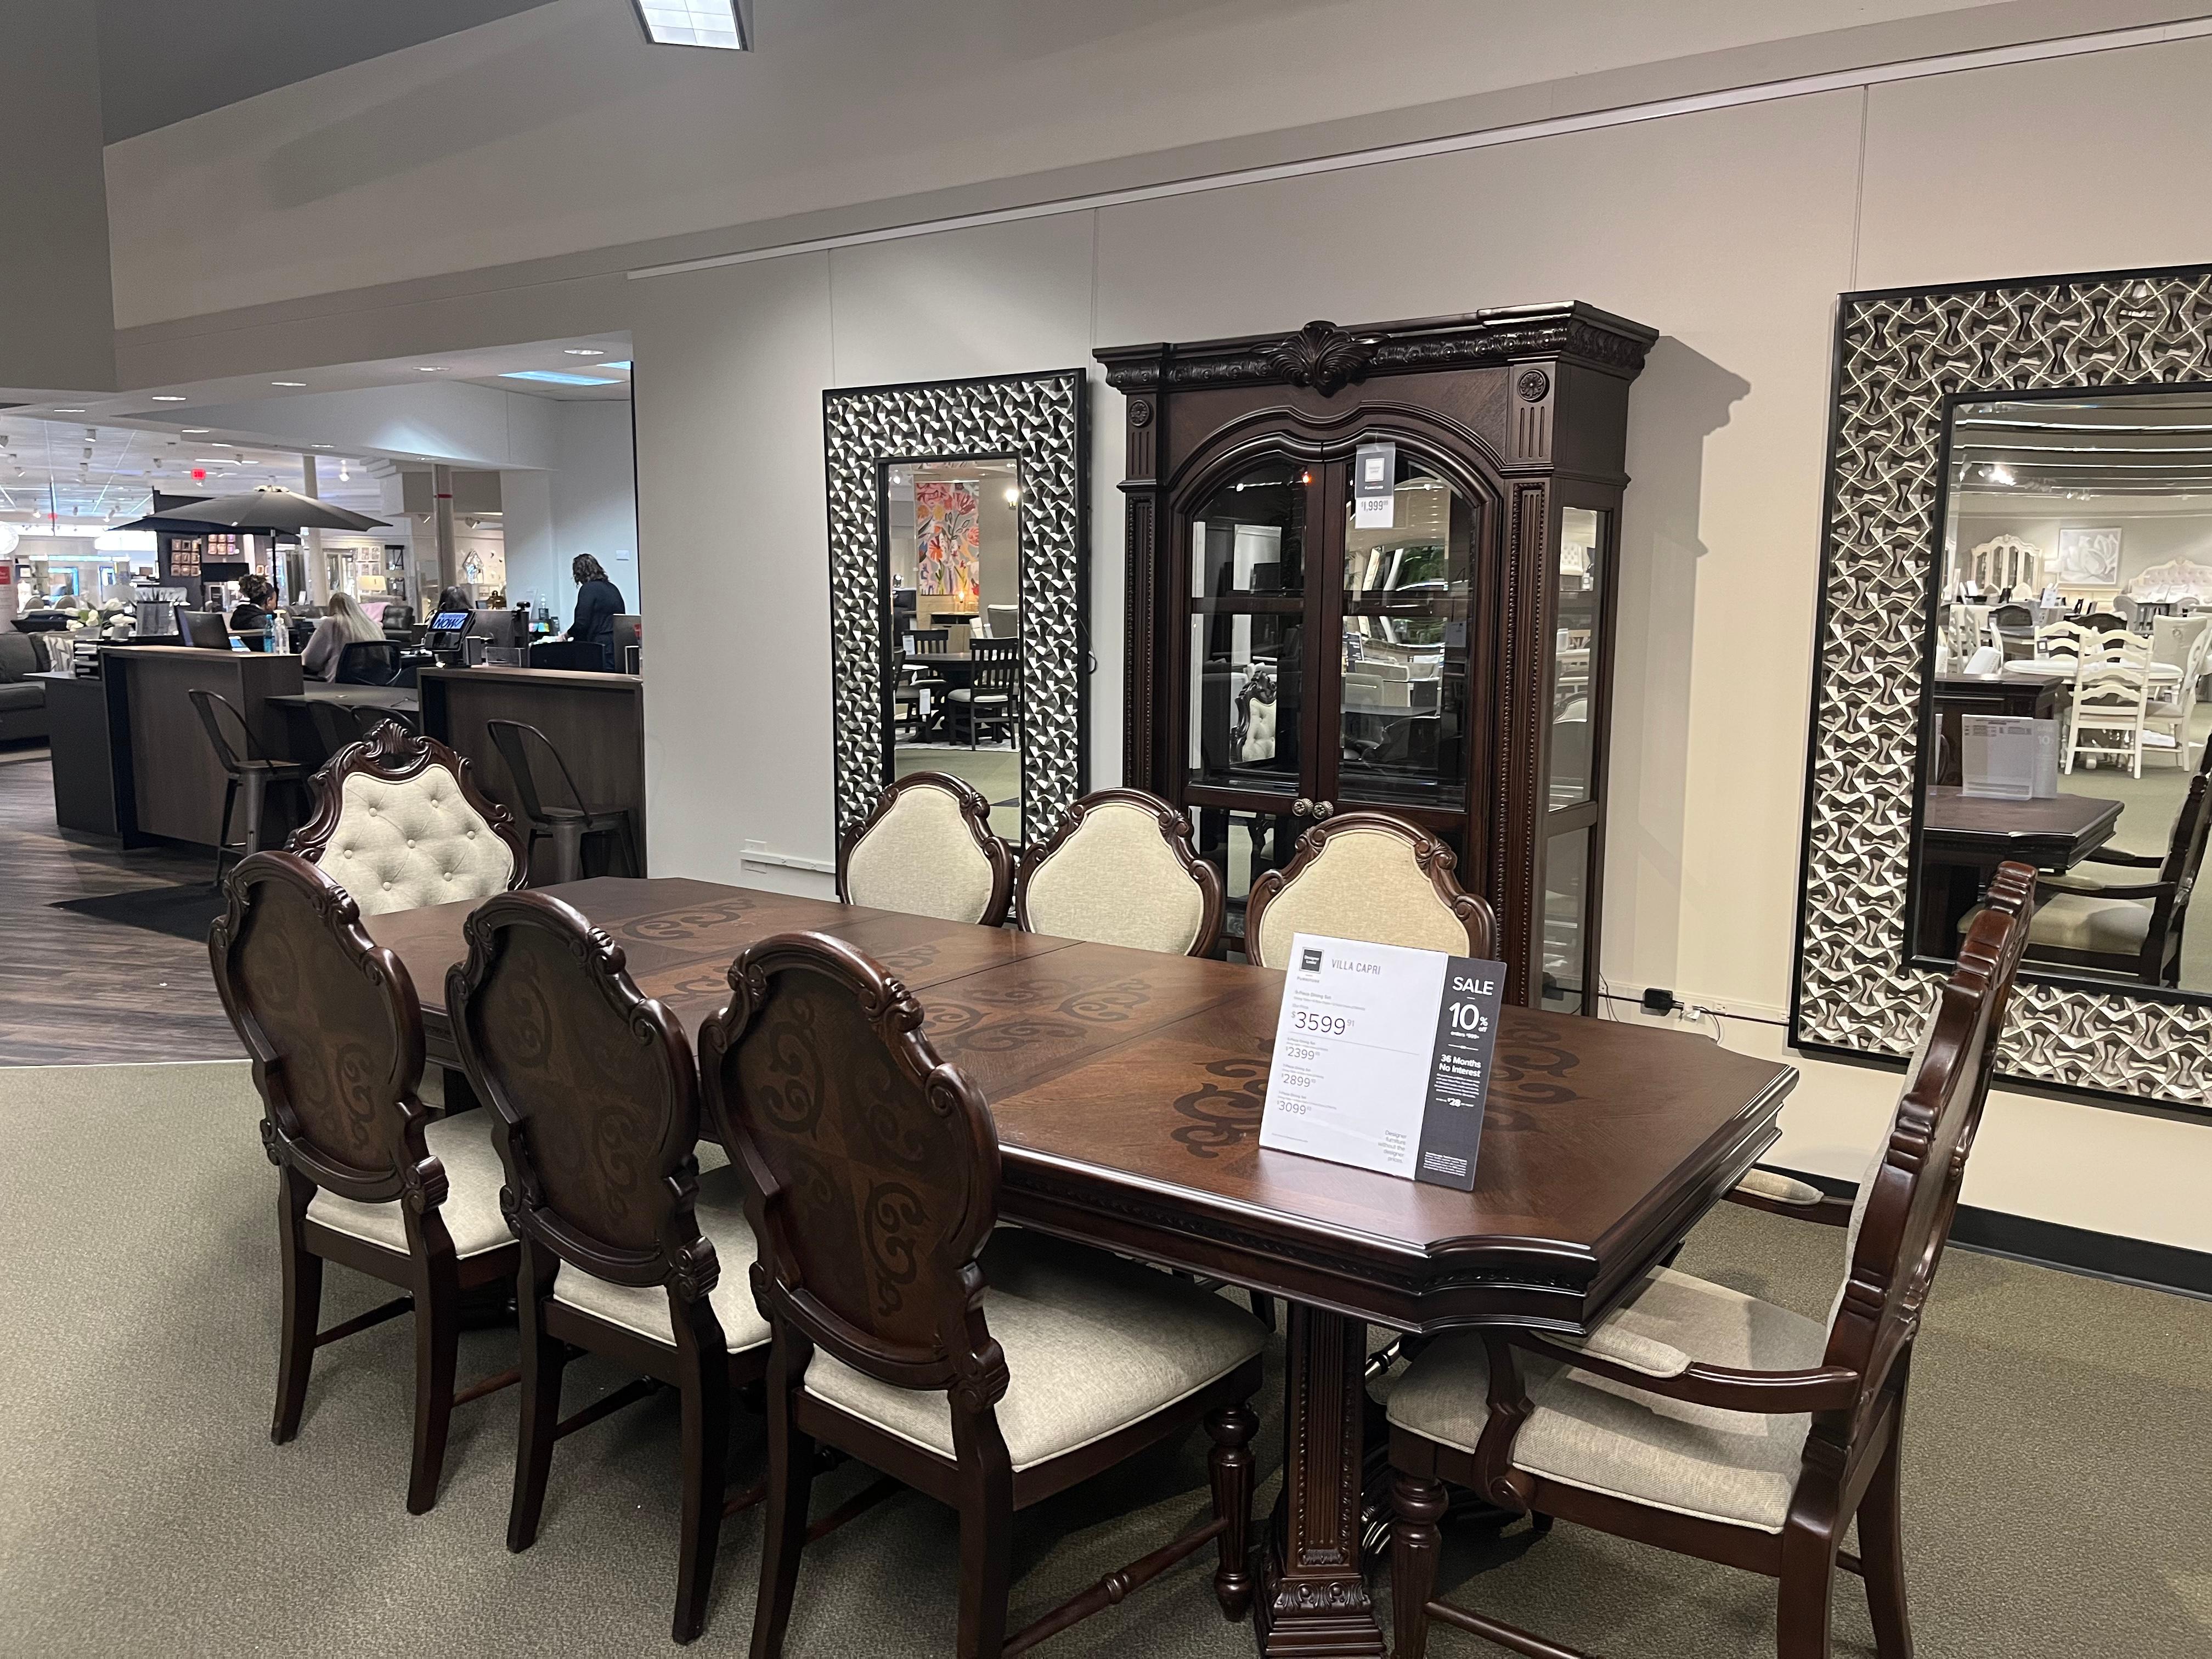 Shop our dining room collections Value City Furniture Ann Arbor (734)720-1875